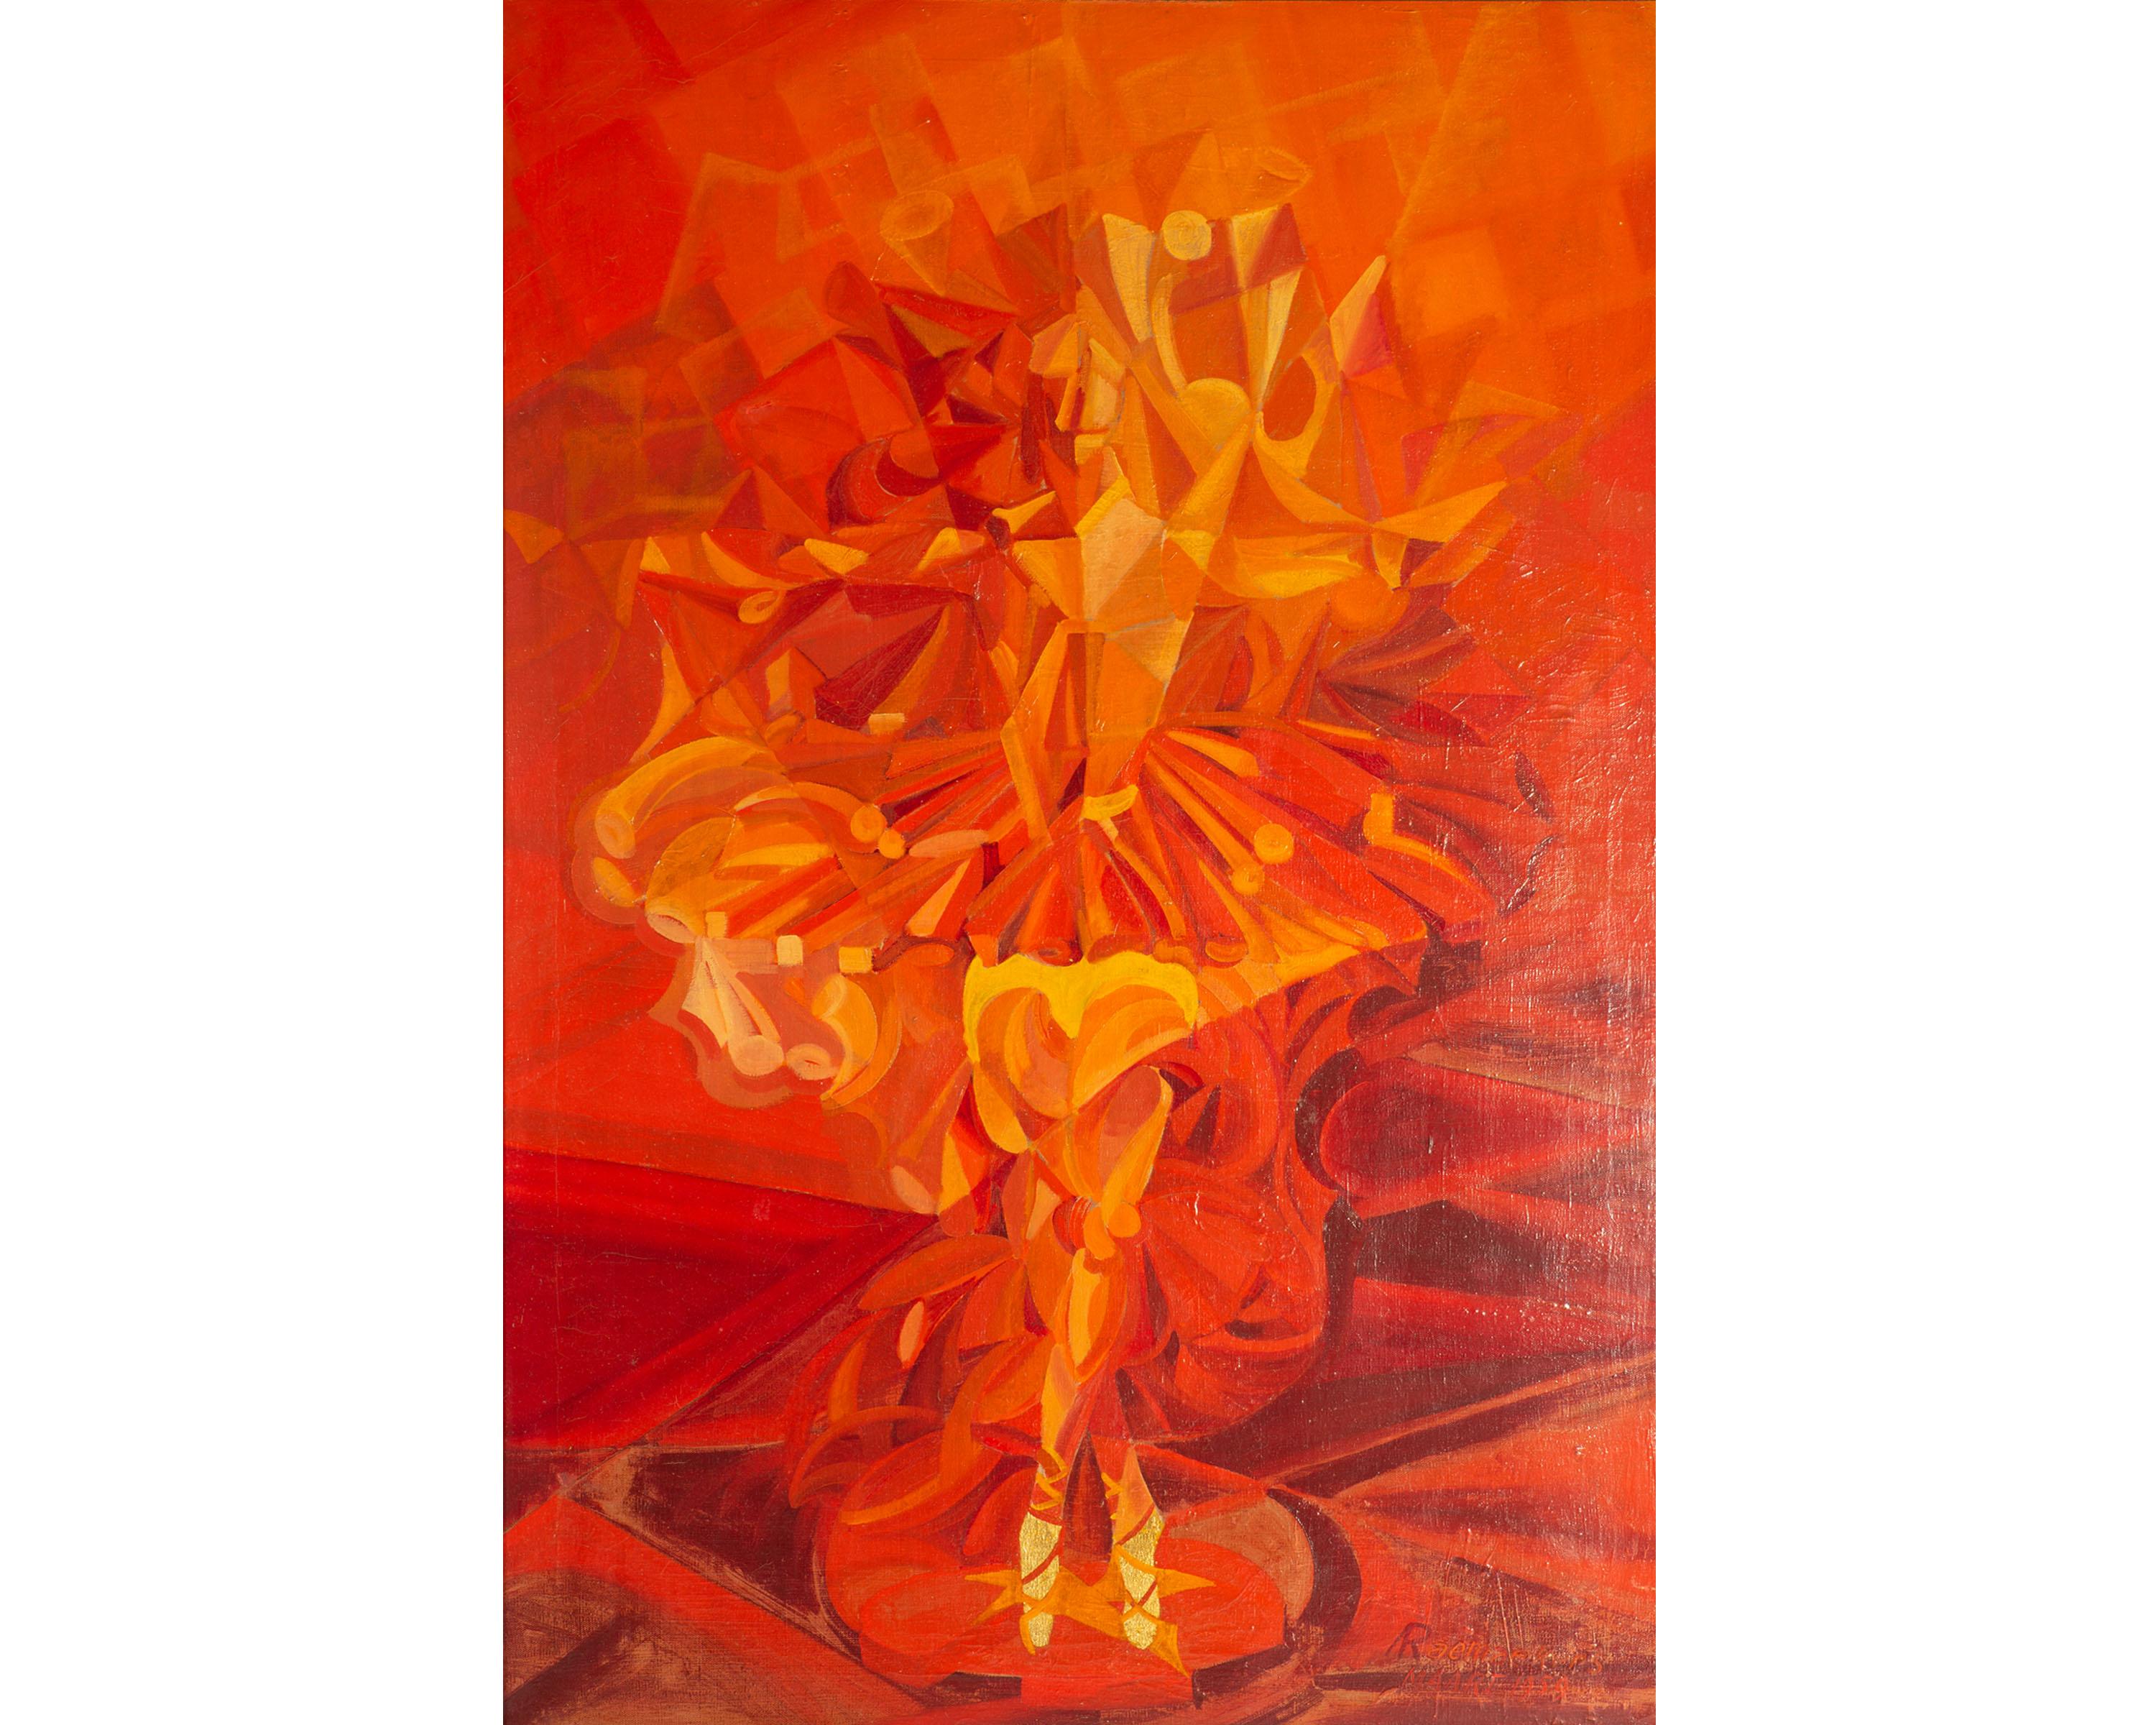 A 1959 signed oil on canvas painting of a ballerina by Dutch artist Antonius Raemaekers (1903-1997). Signed to the lower right, this Cubist painting features a poised ballerina depicted in red and yellow. While her toe shoes appear stationary, there